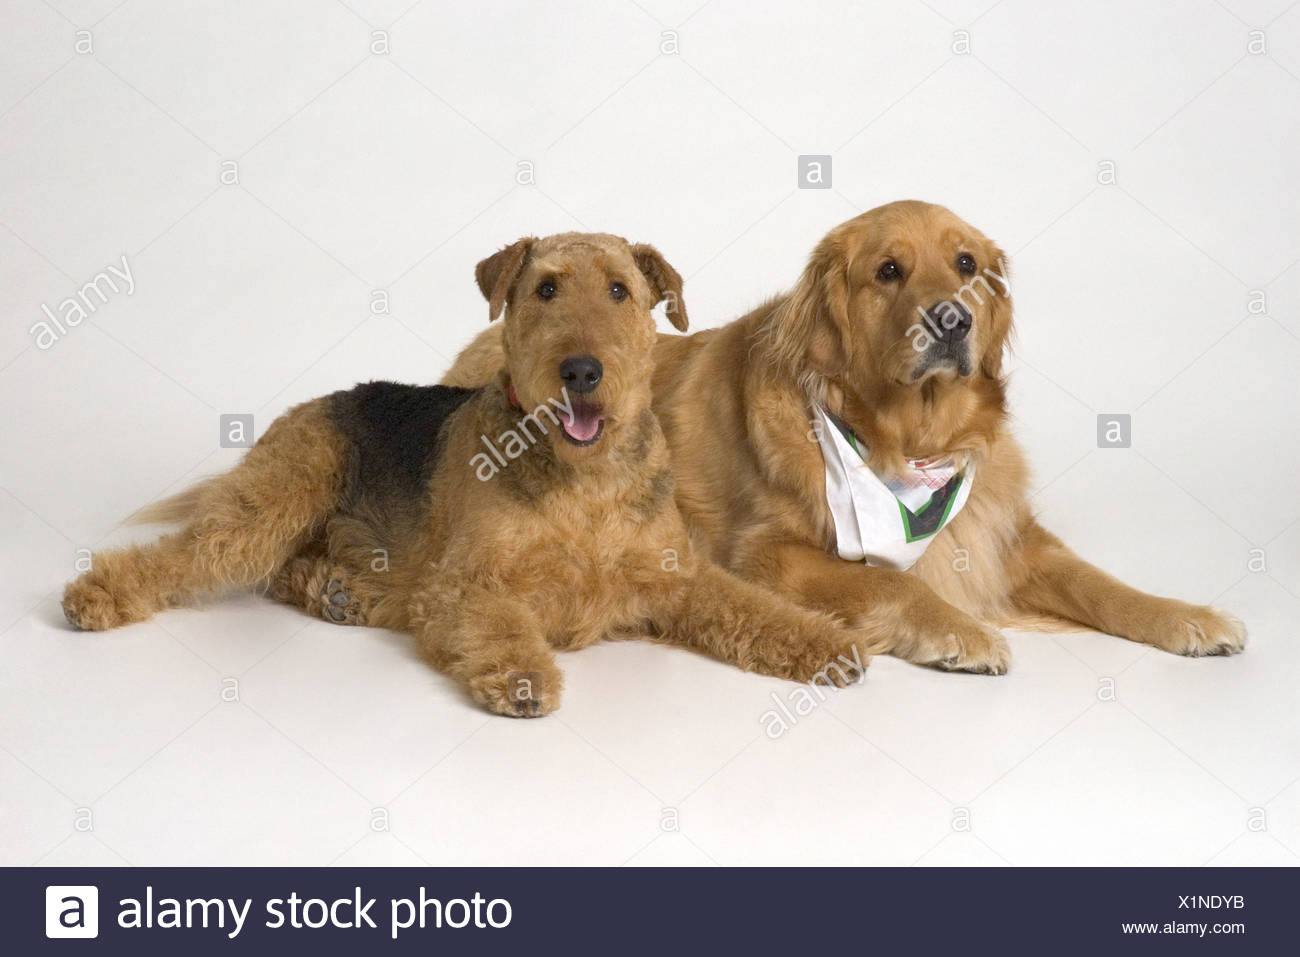 golden airedale